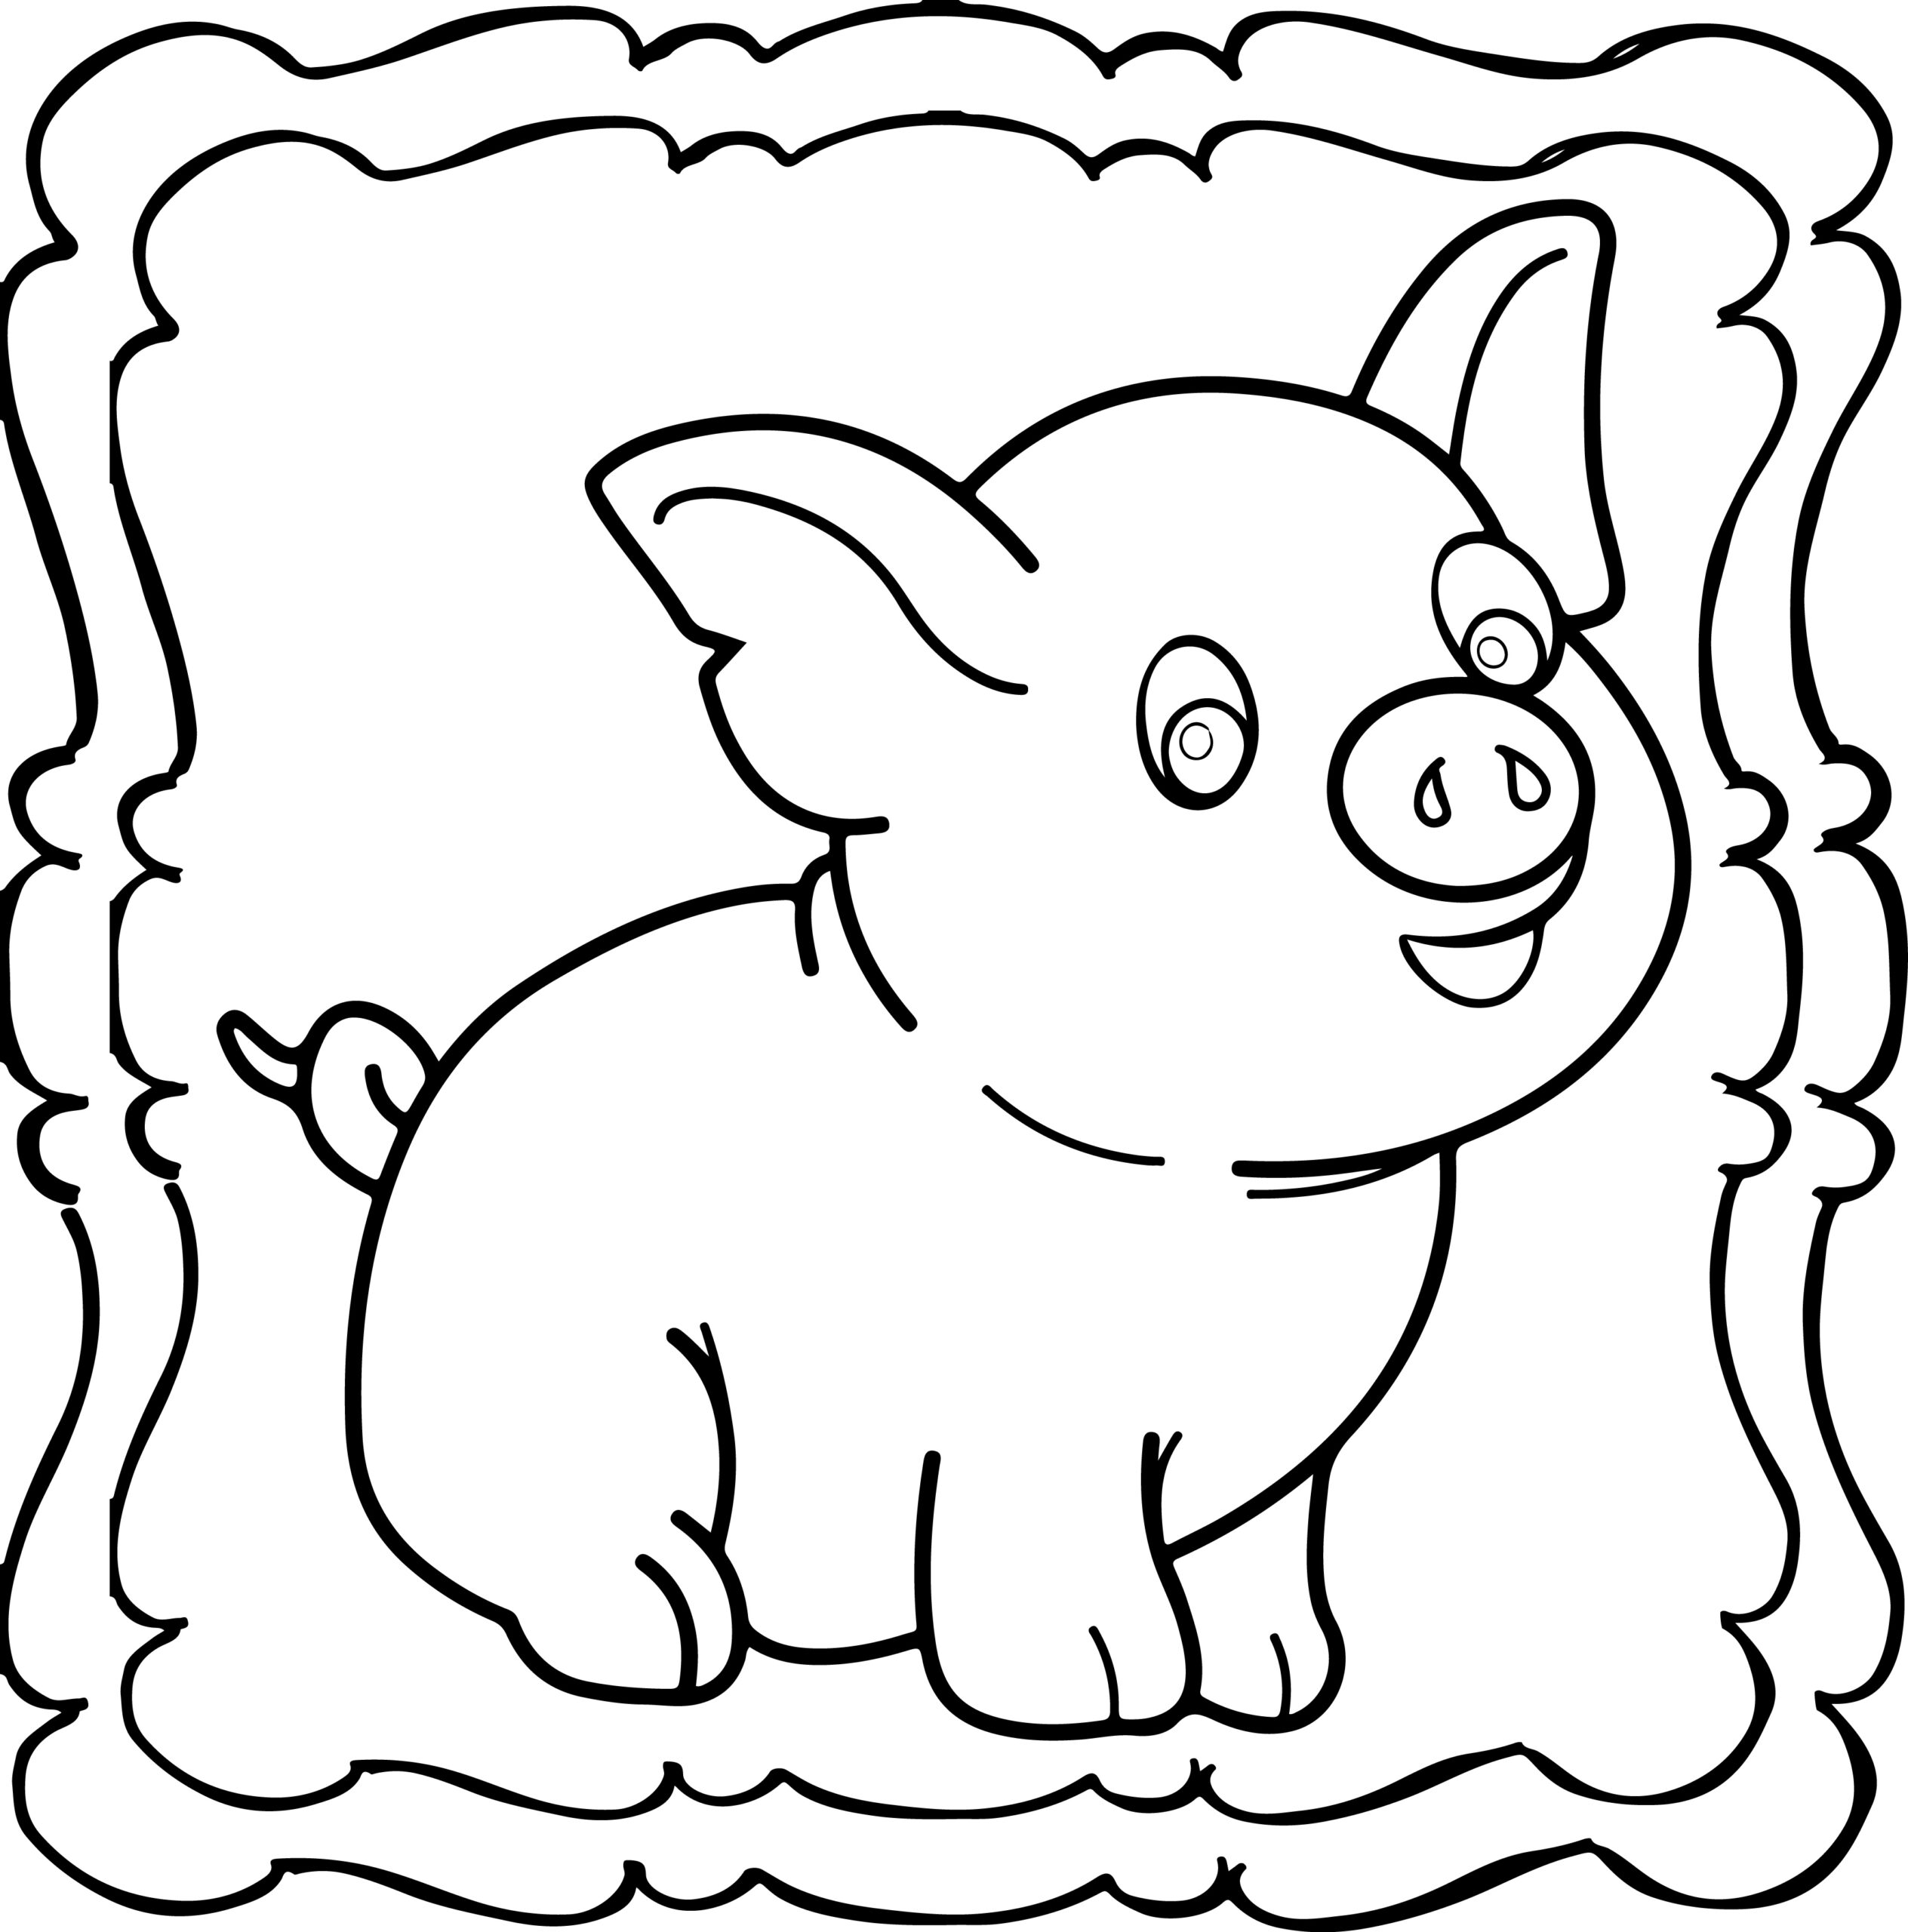 Pig coloring book easy and fun pigs coloring book for kids made by teachers